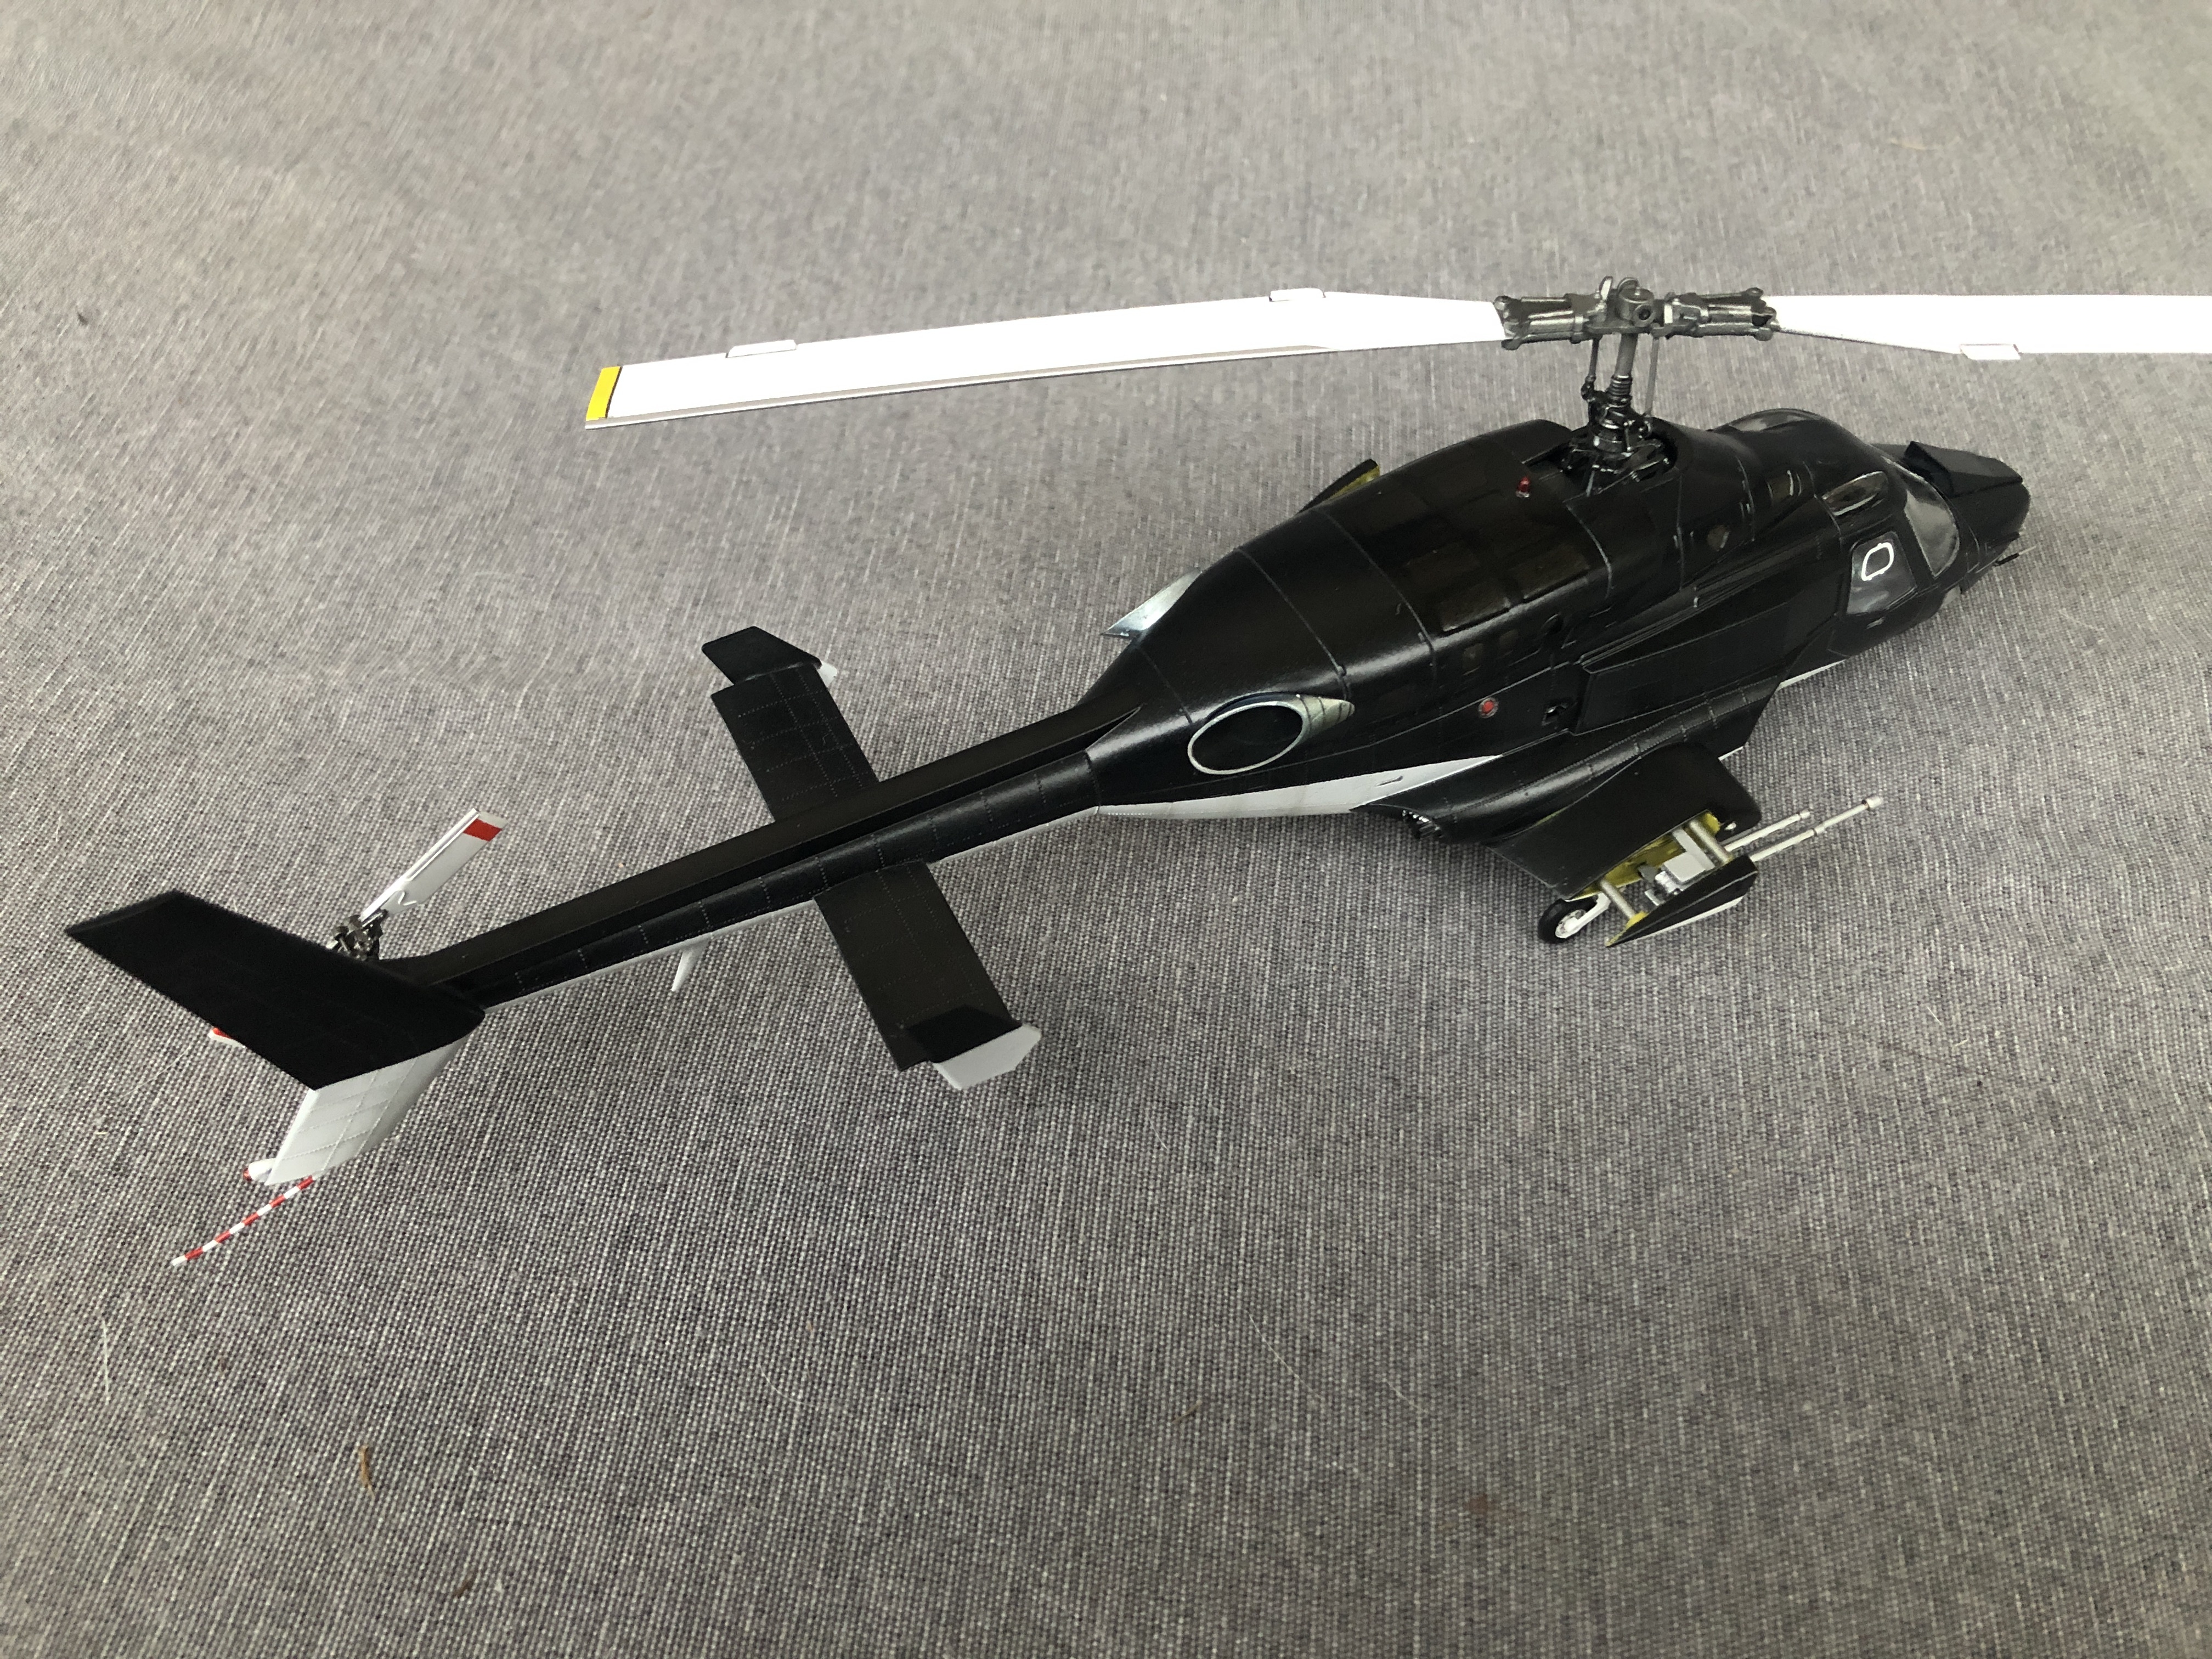 [AOSHIMA] 1/48 AIRWOLF / SUPERCOPTER 9y9v